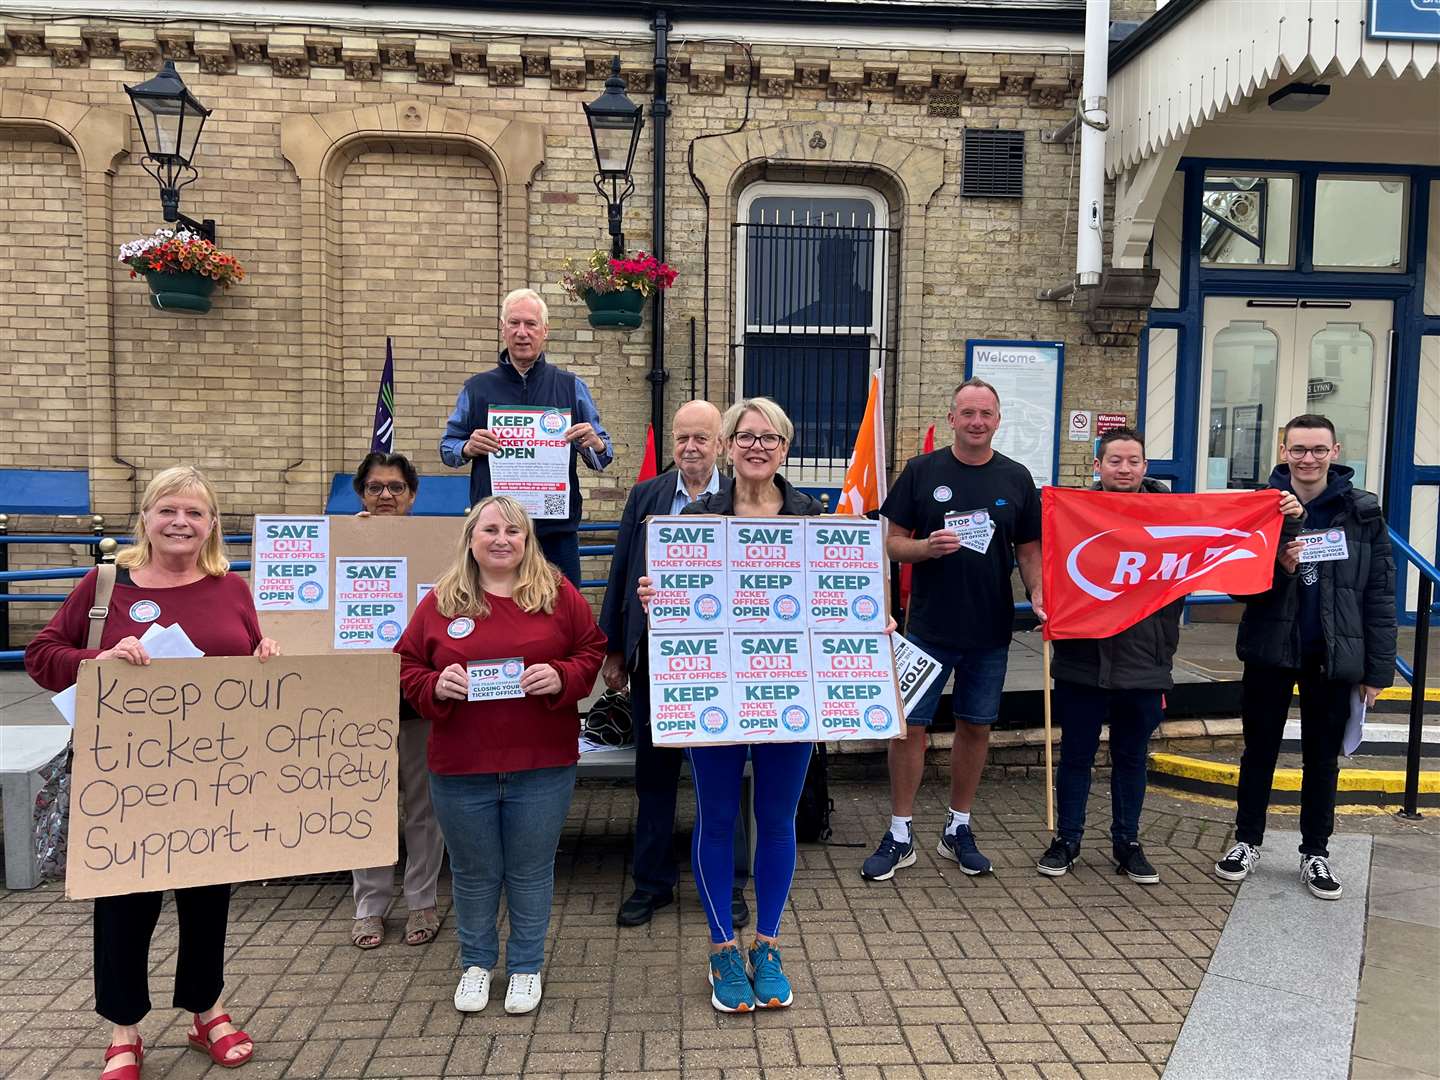 Representatives from the RMT union and the area’s Trade Unions Council, as well as concerned passengers were among those who gathered at the station